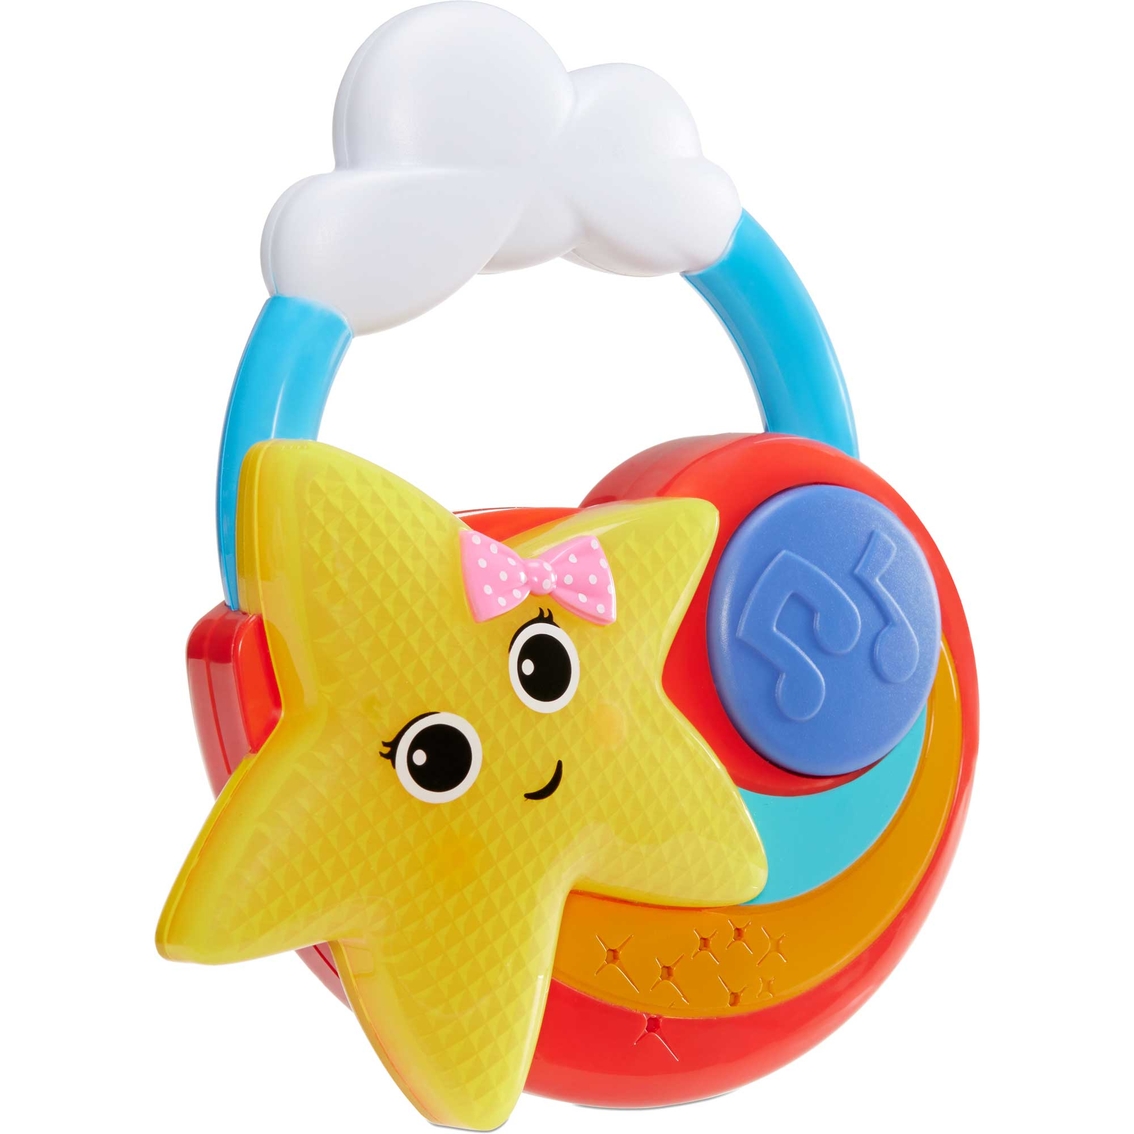 Little Tikes Little Baby Bum Twinkle's Music on the Go Infant Toy - Image 3 of 10